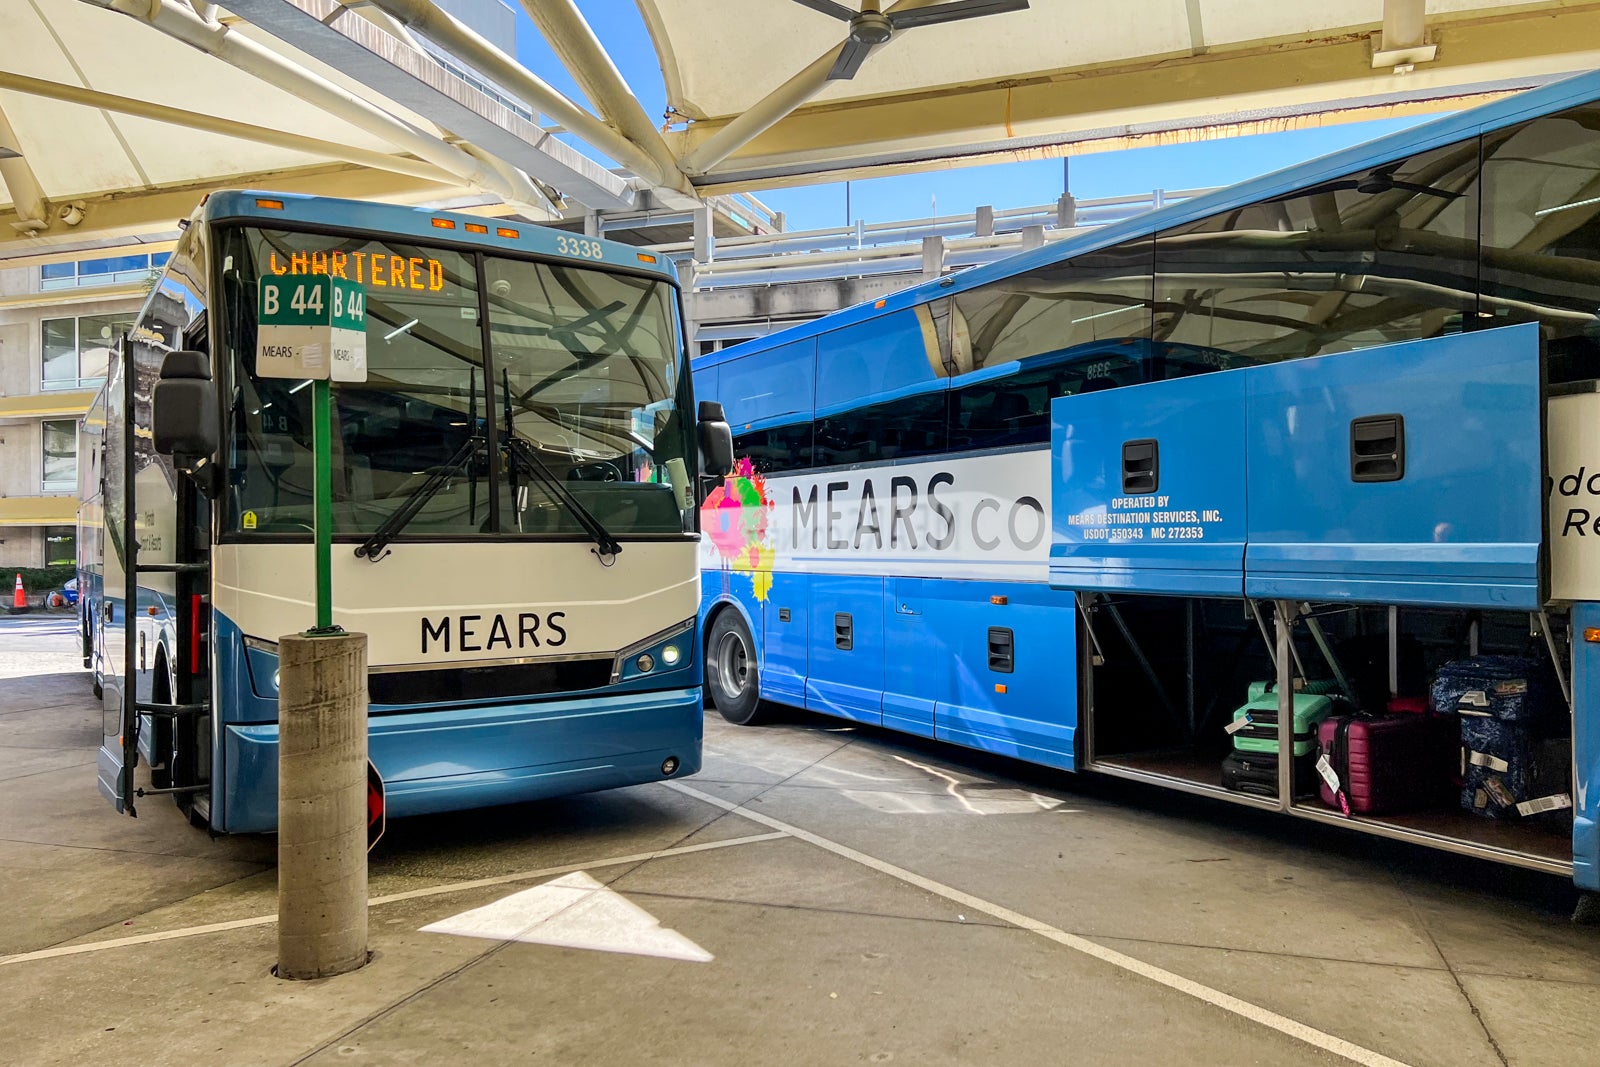 Mears connect busses